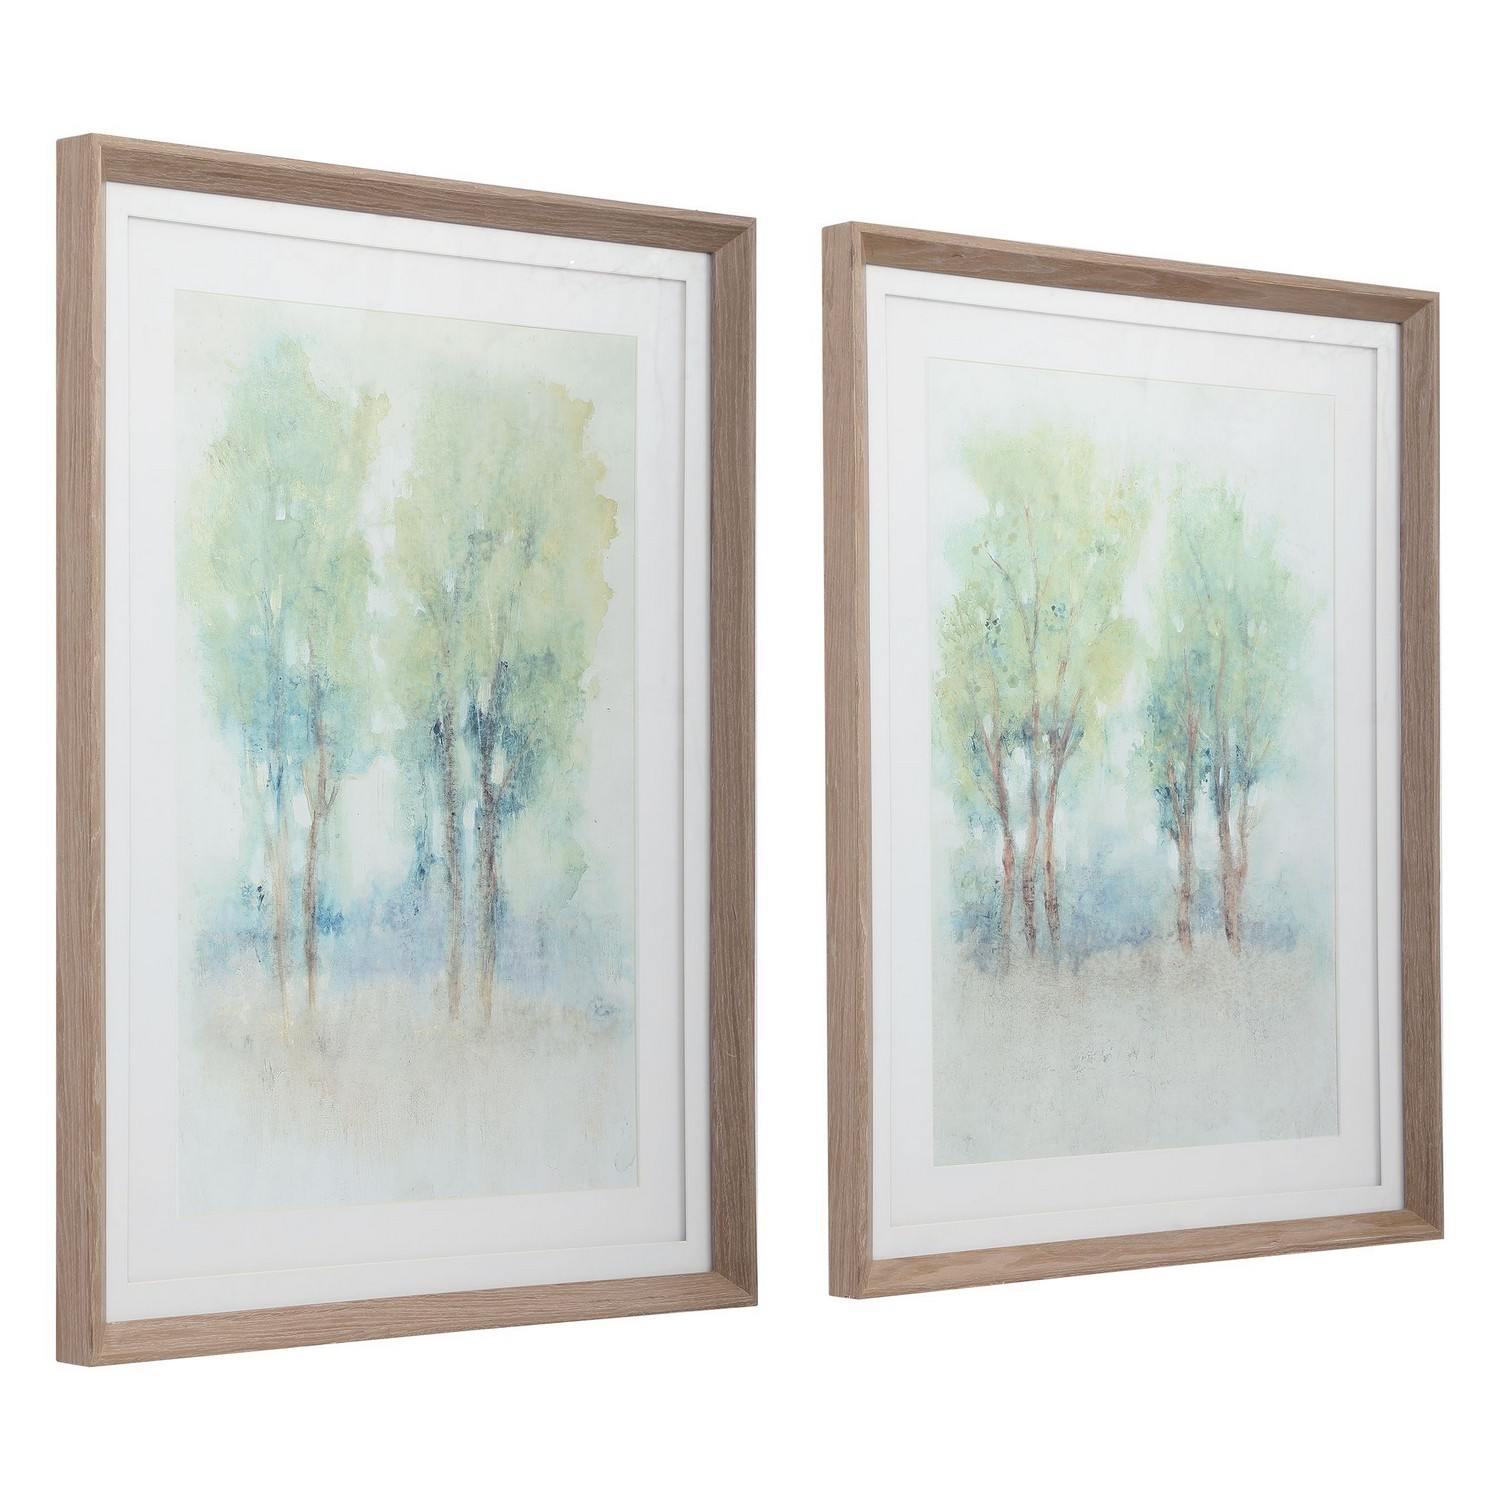 Uttermost Meadow View Framed Prints - Set of 2